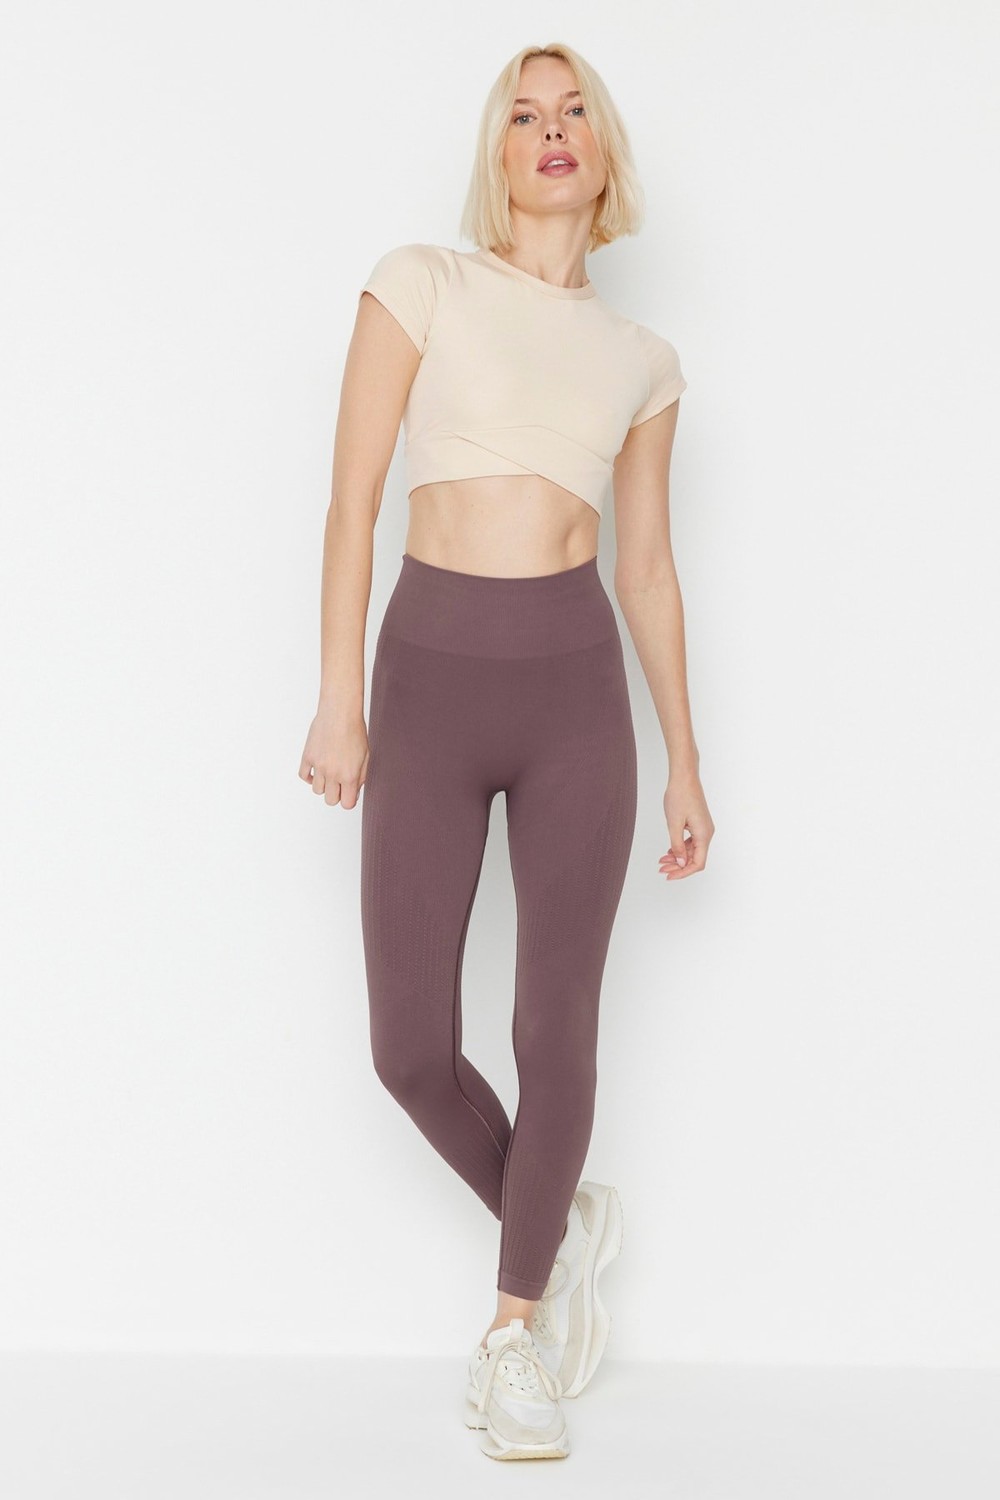 Jerf Lily - Natural Brown High Waist Consolidating Leggings